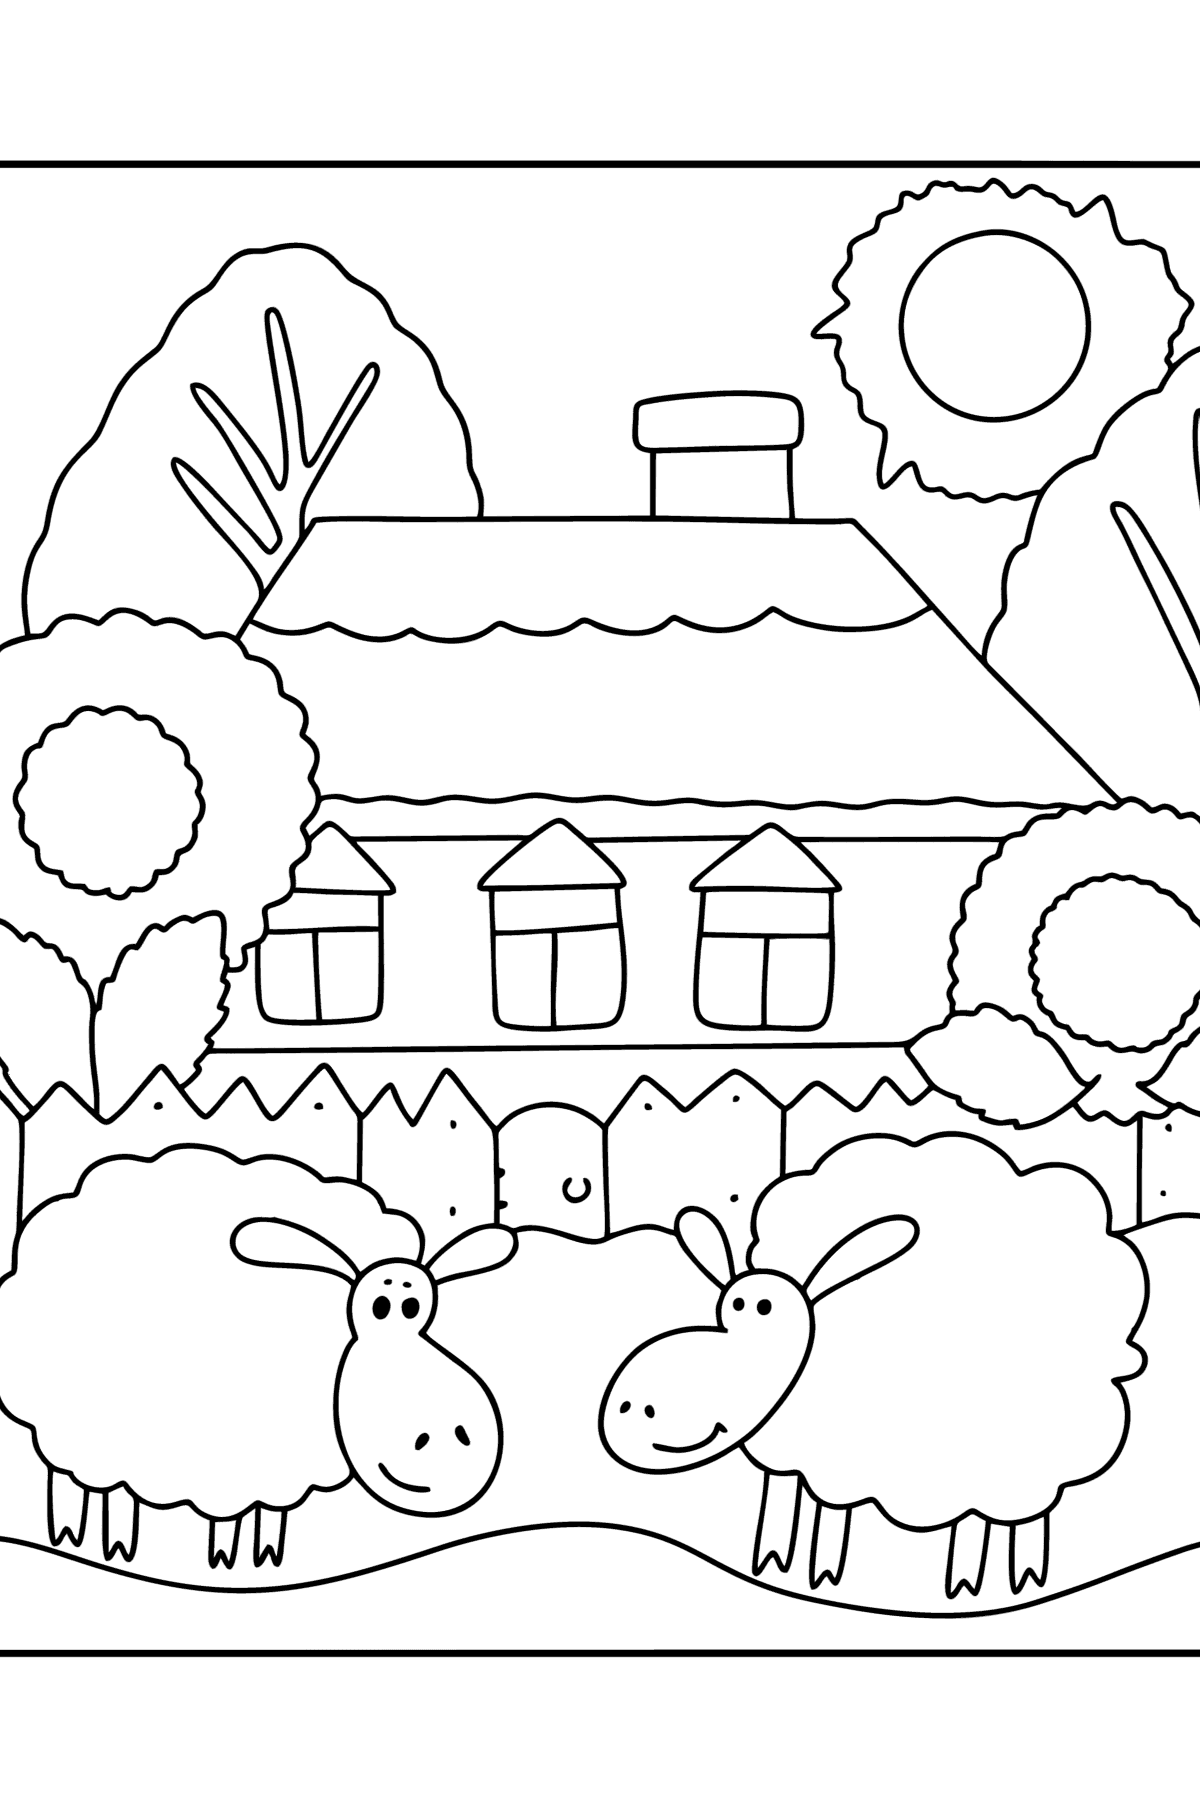 FarmHouse coloring page - Coloring Pages for Kids